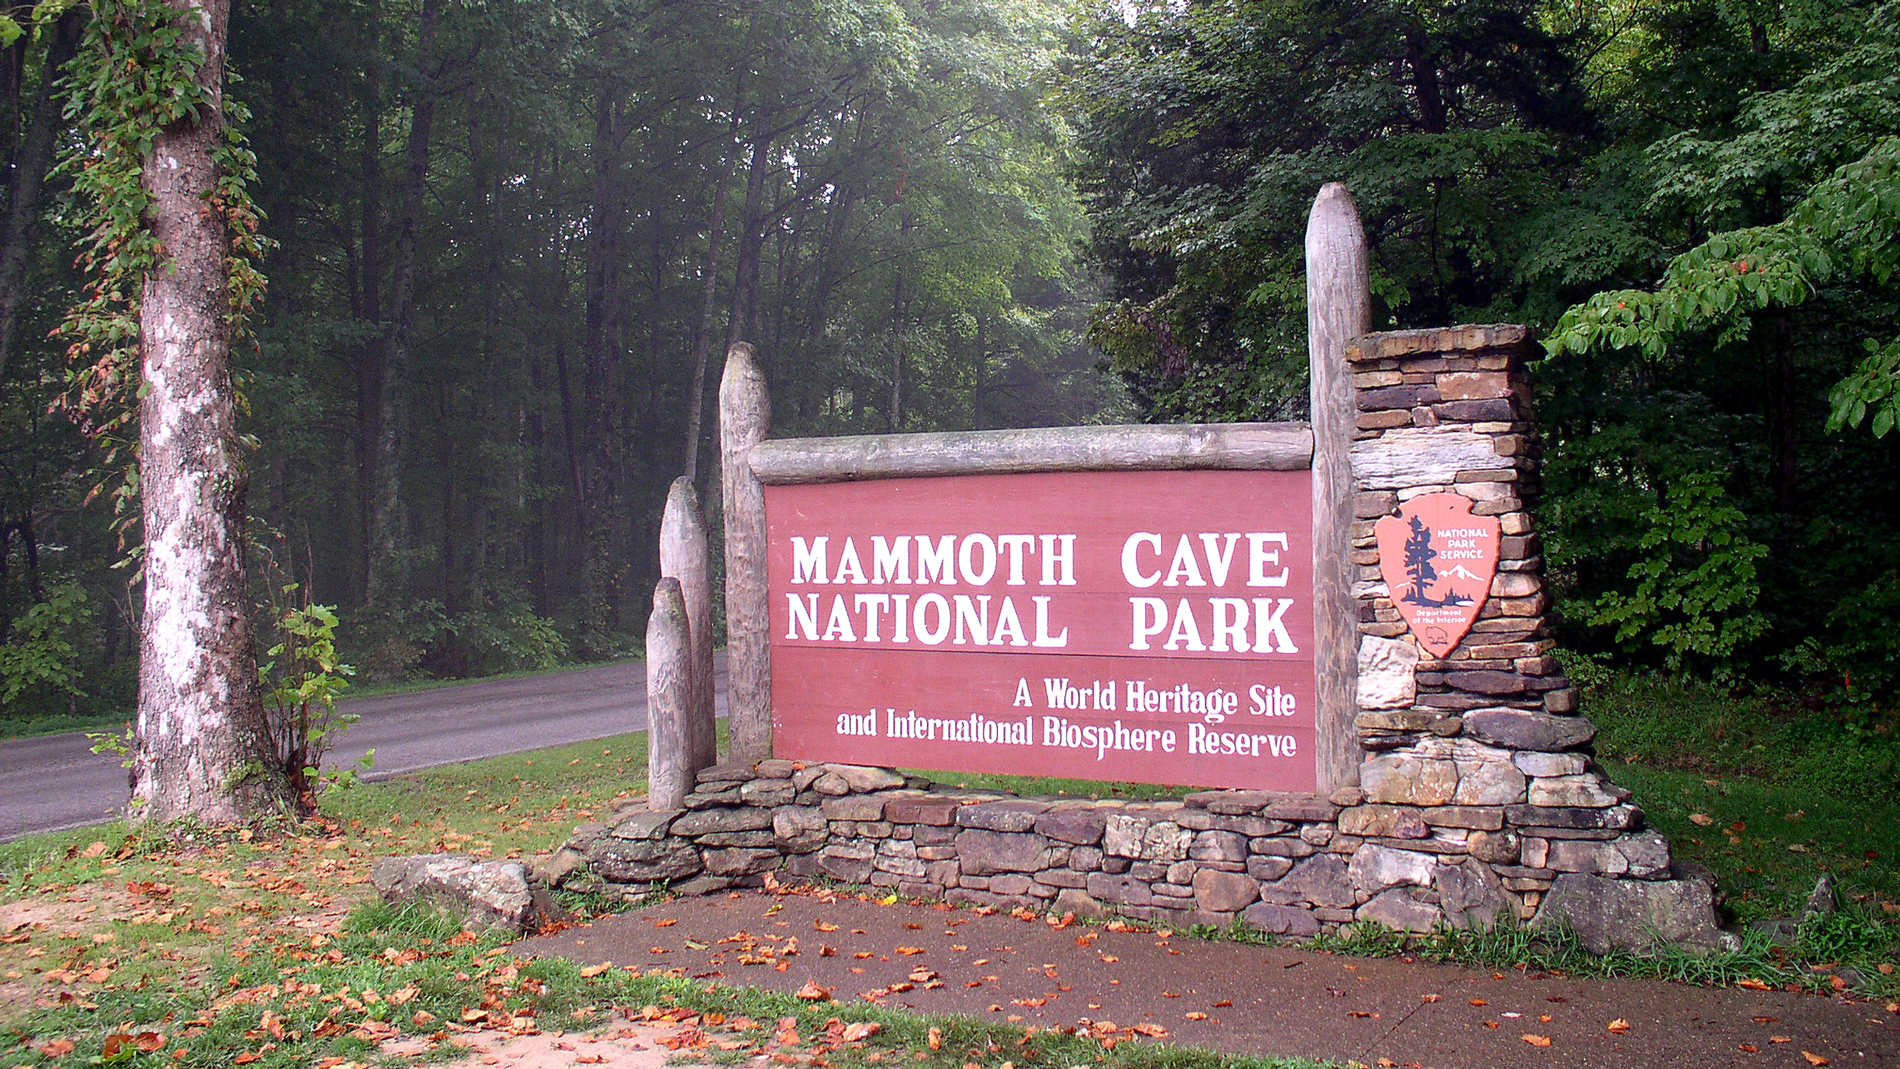 Episode 12: Mammoth Cave, Roadside Assistance, & Changes to National Parks